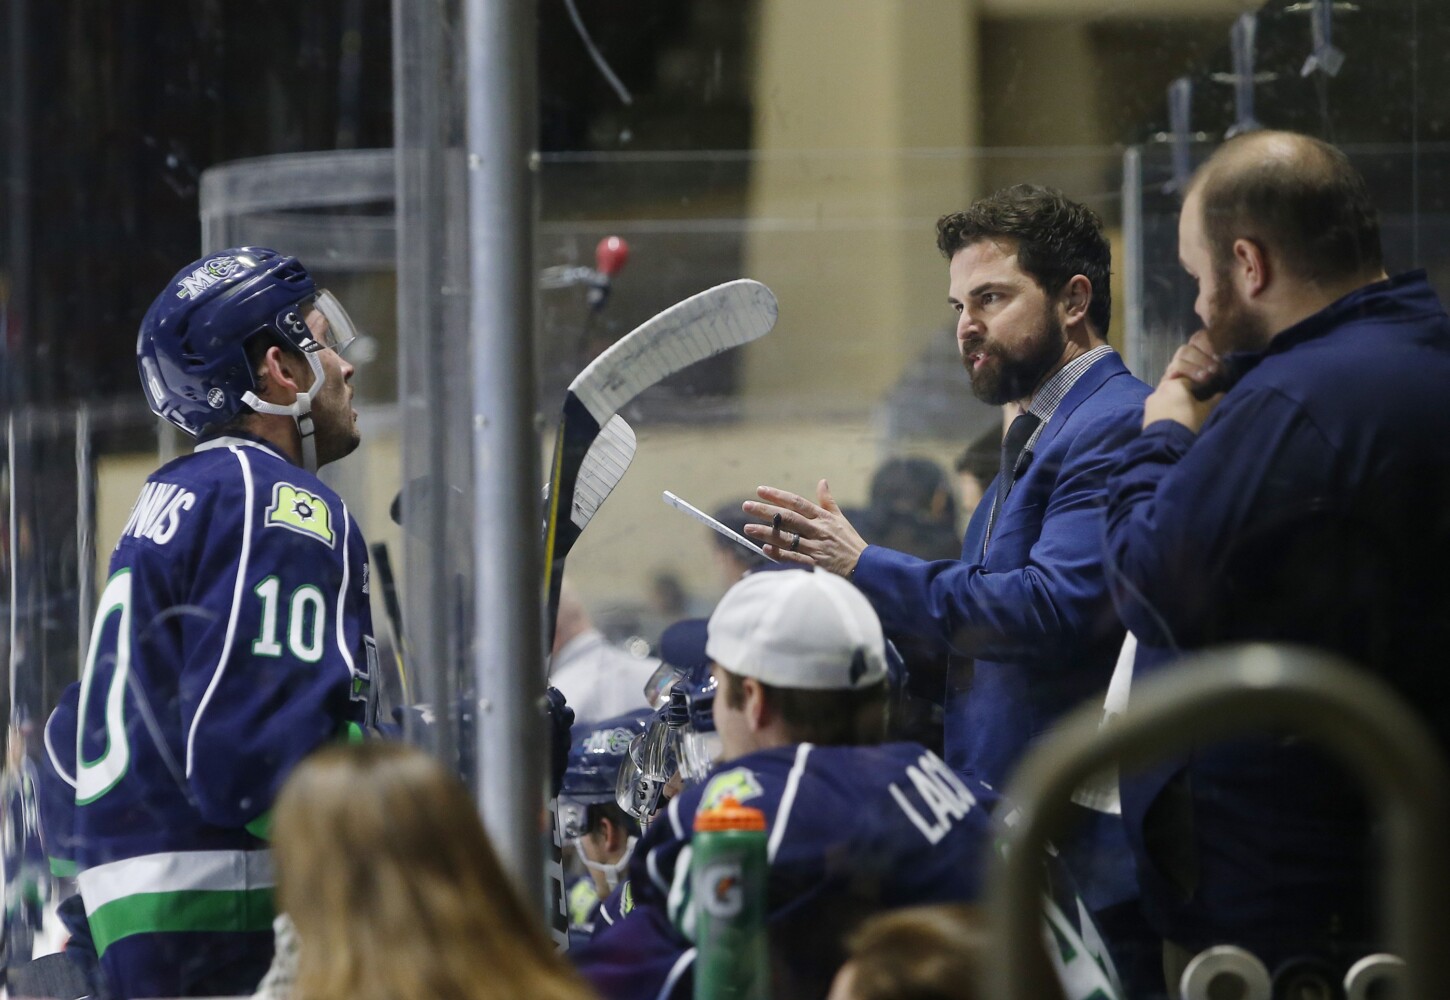 Maine Mariners hope to hit their stride in second season